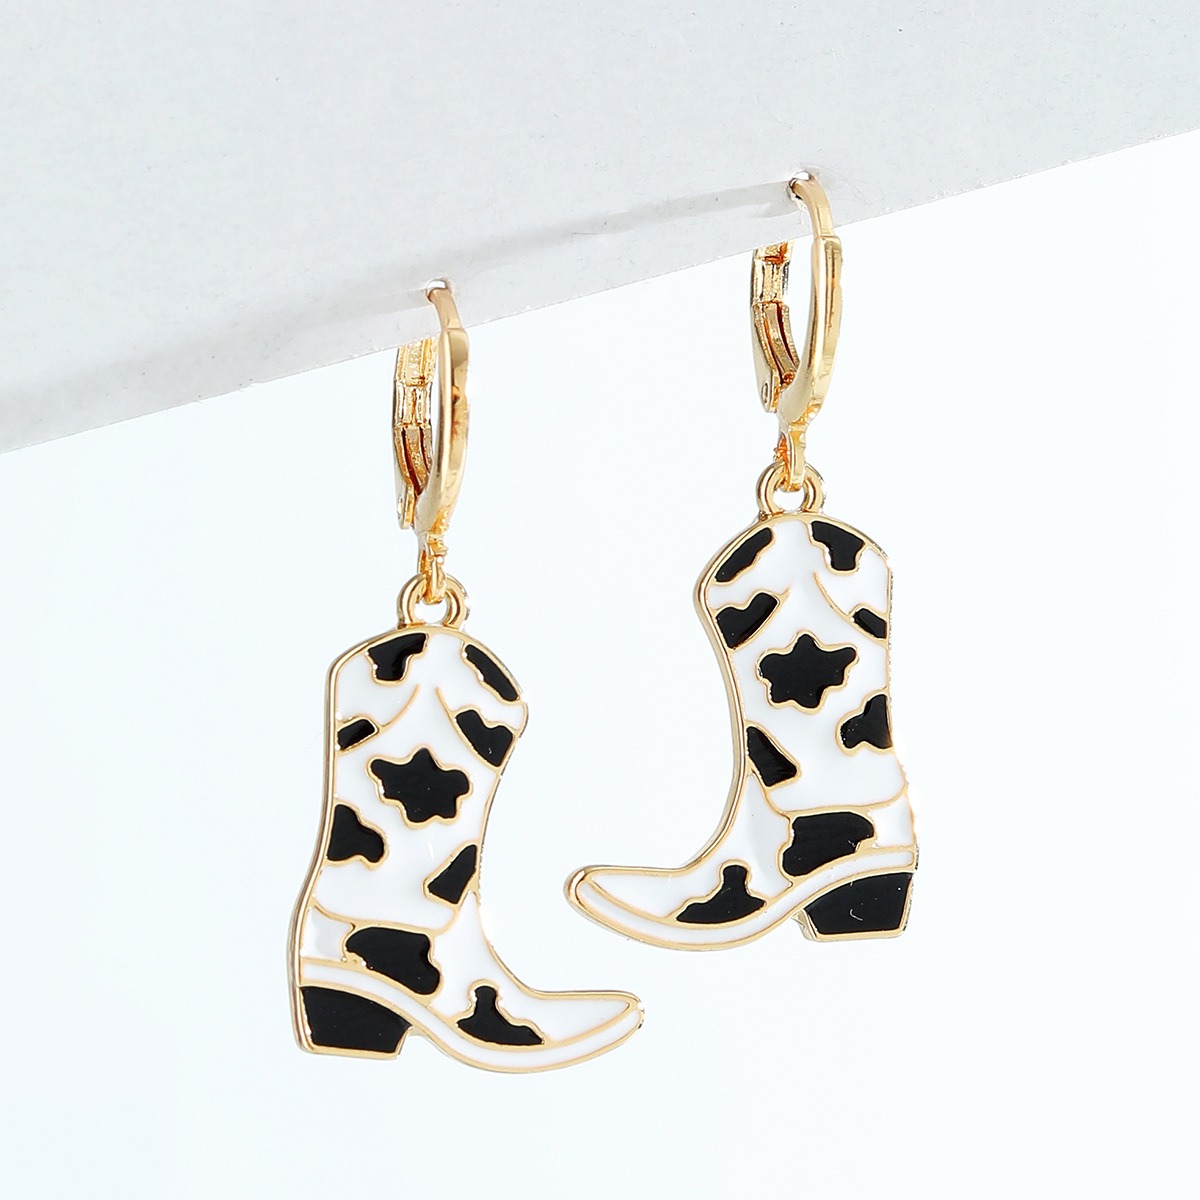 European and American Fashion Jewelry Ins Popular Y2K Oil Dripping Western Cowboy Boots Earrings